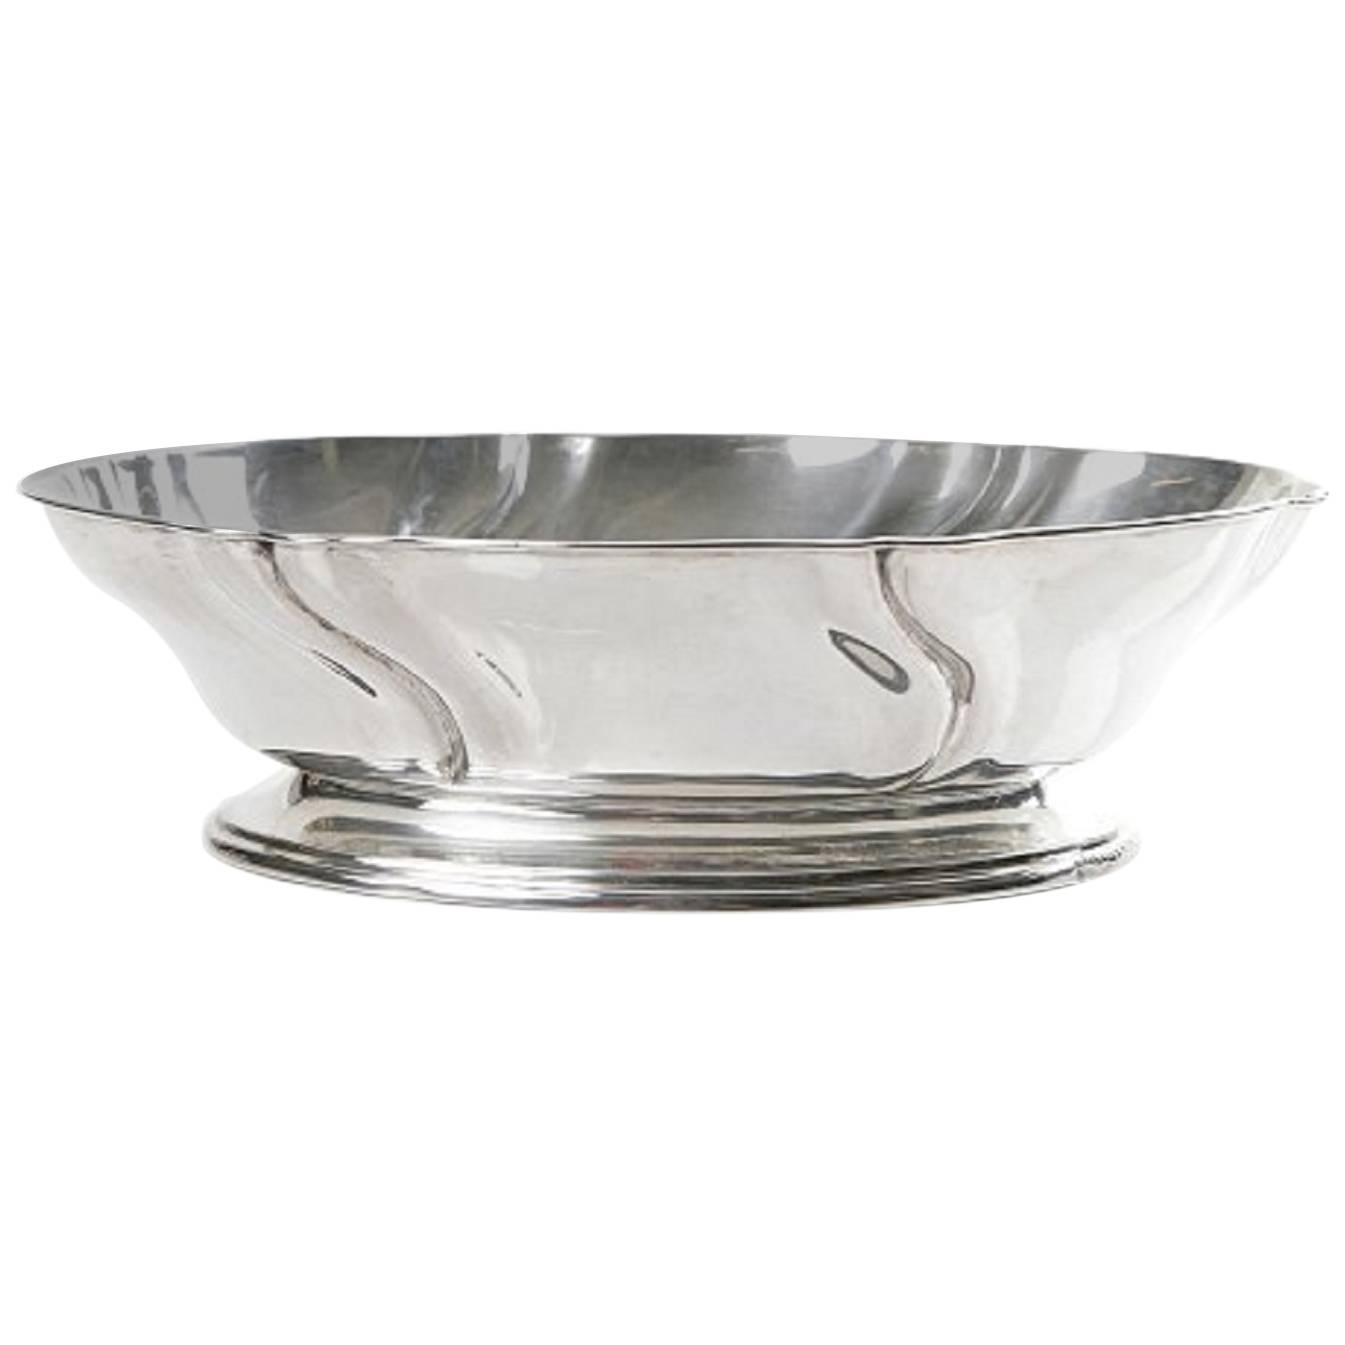 Large Silver Bowl, C G Hallberg, Sweden, Rococo Style For Sale at 1stdibs